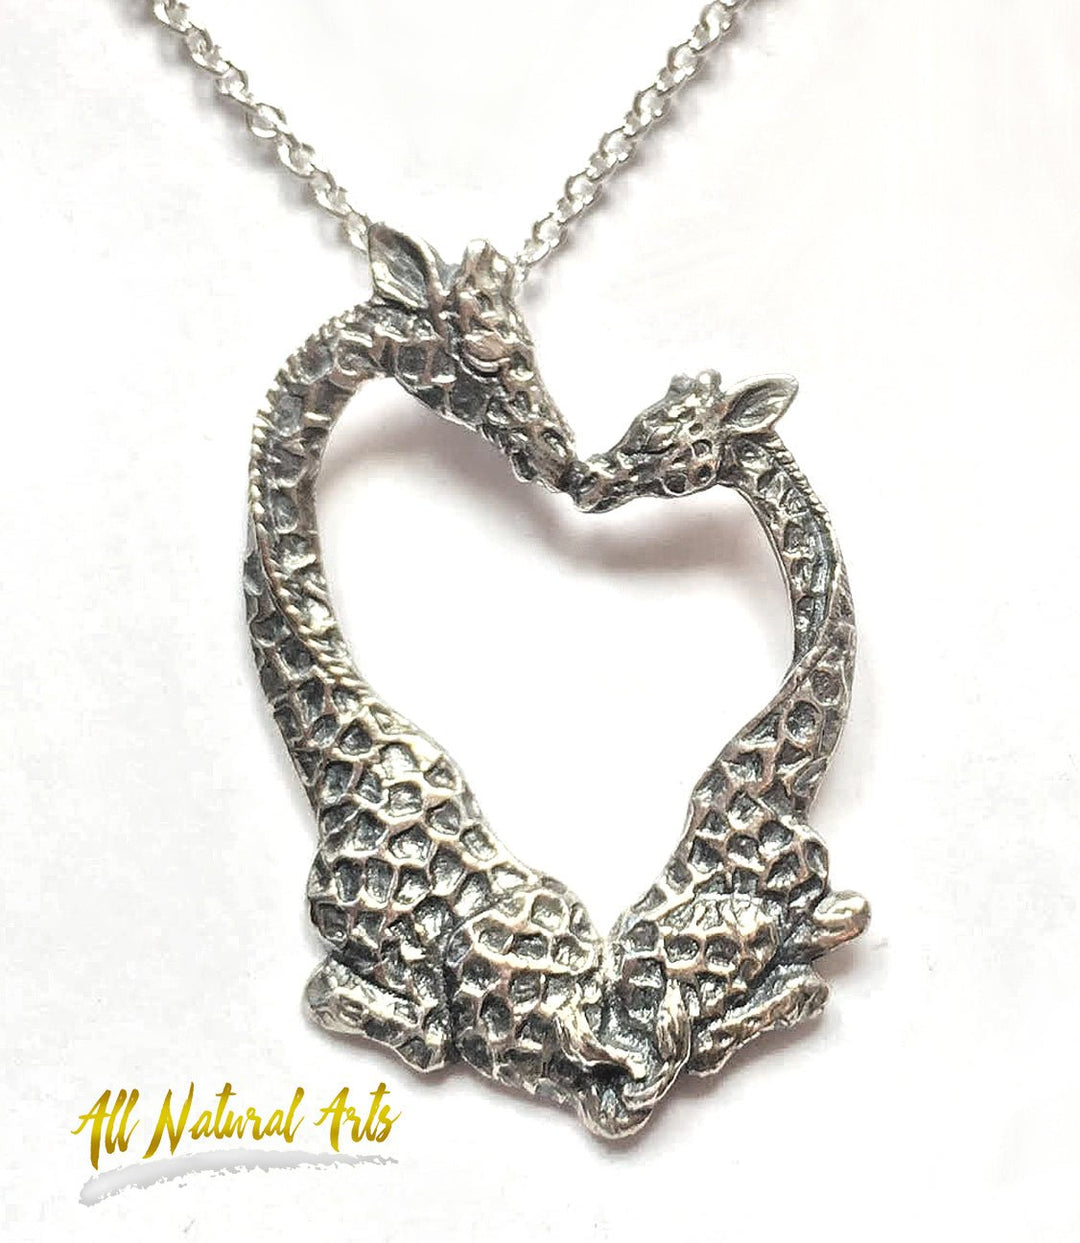 High on Love Giraffe Necklace - Sterling Silver or Gold Toned Brass